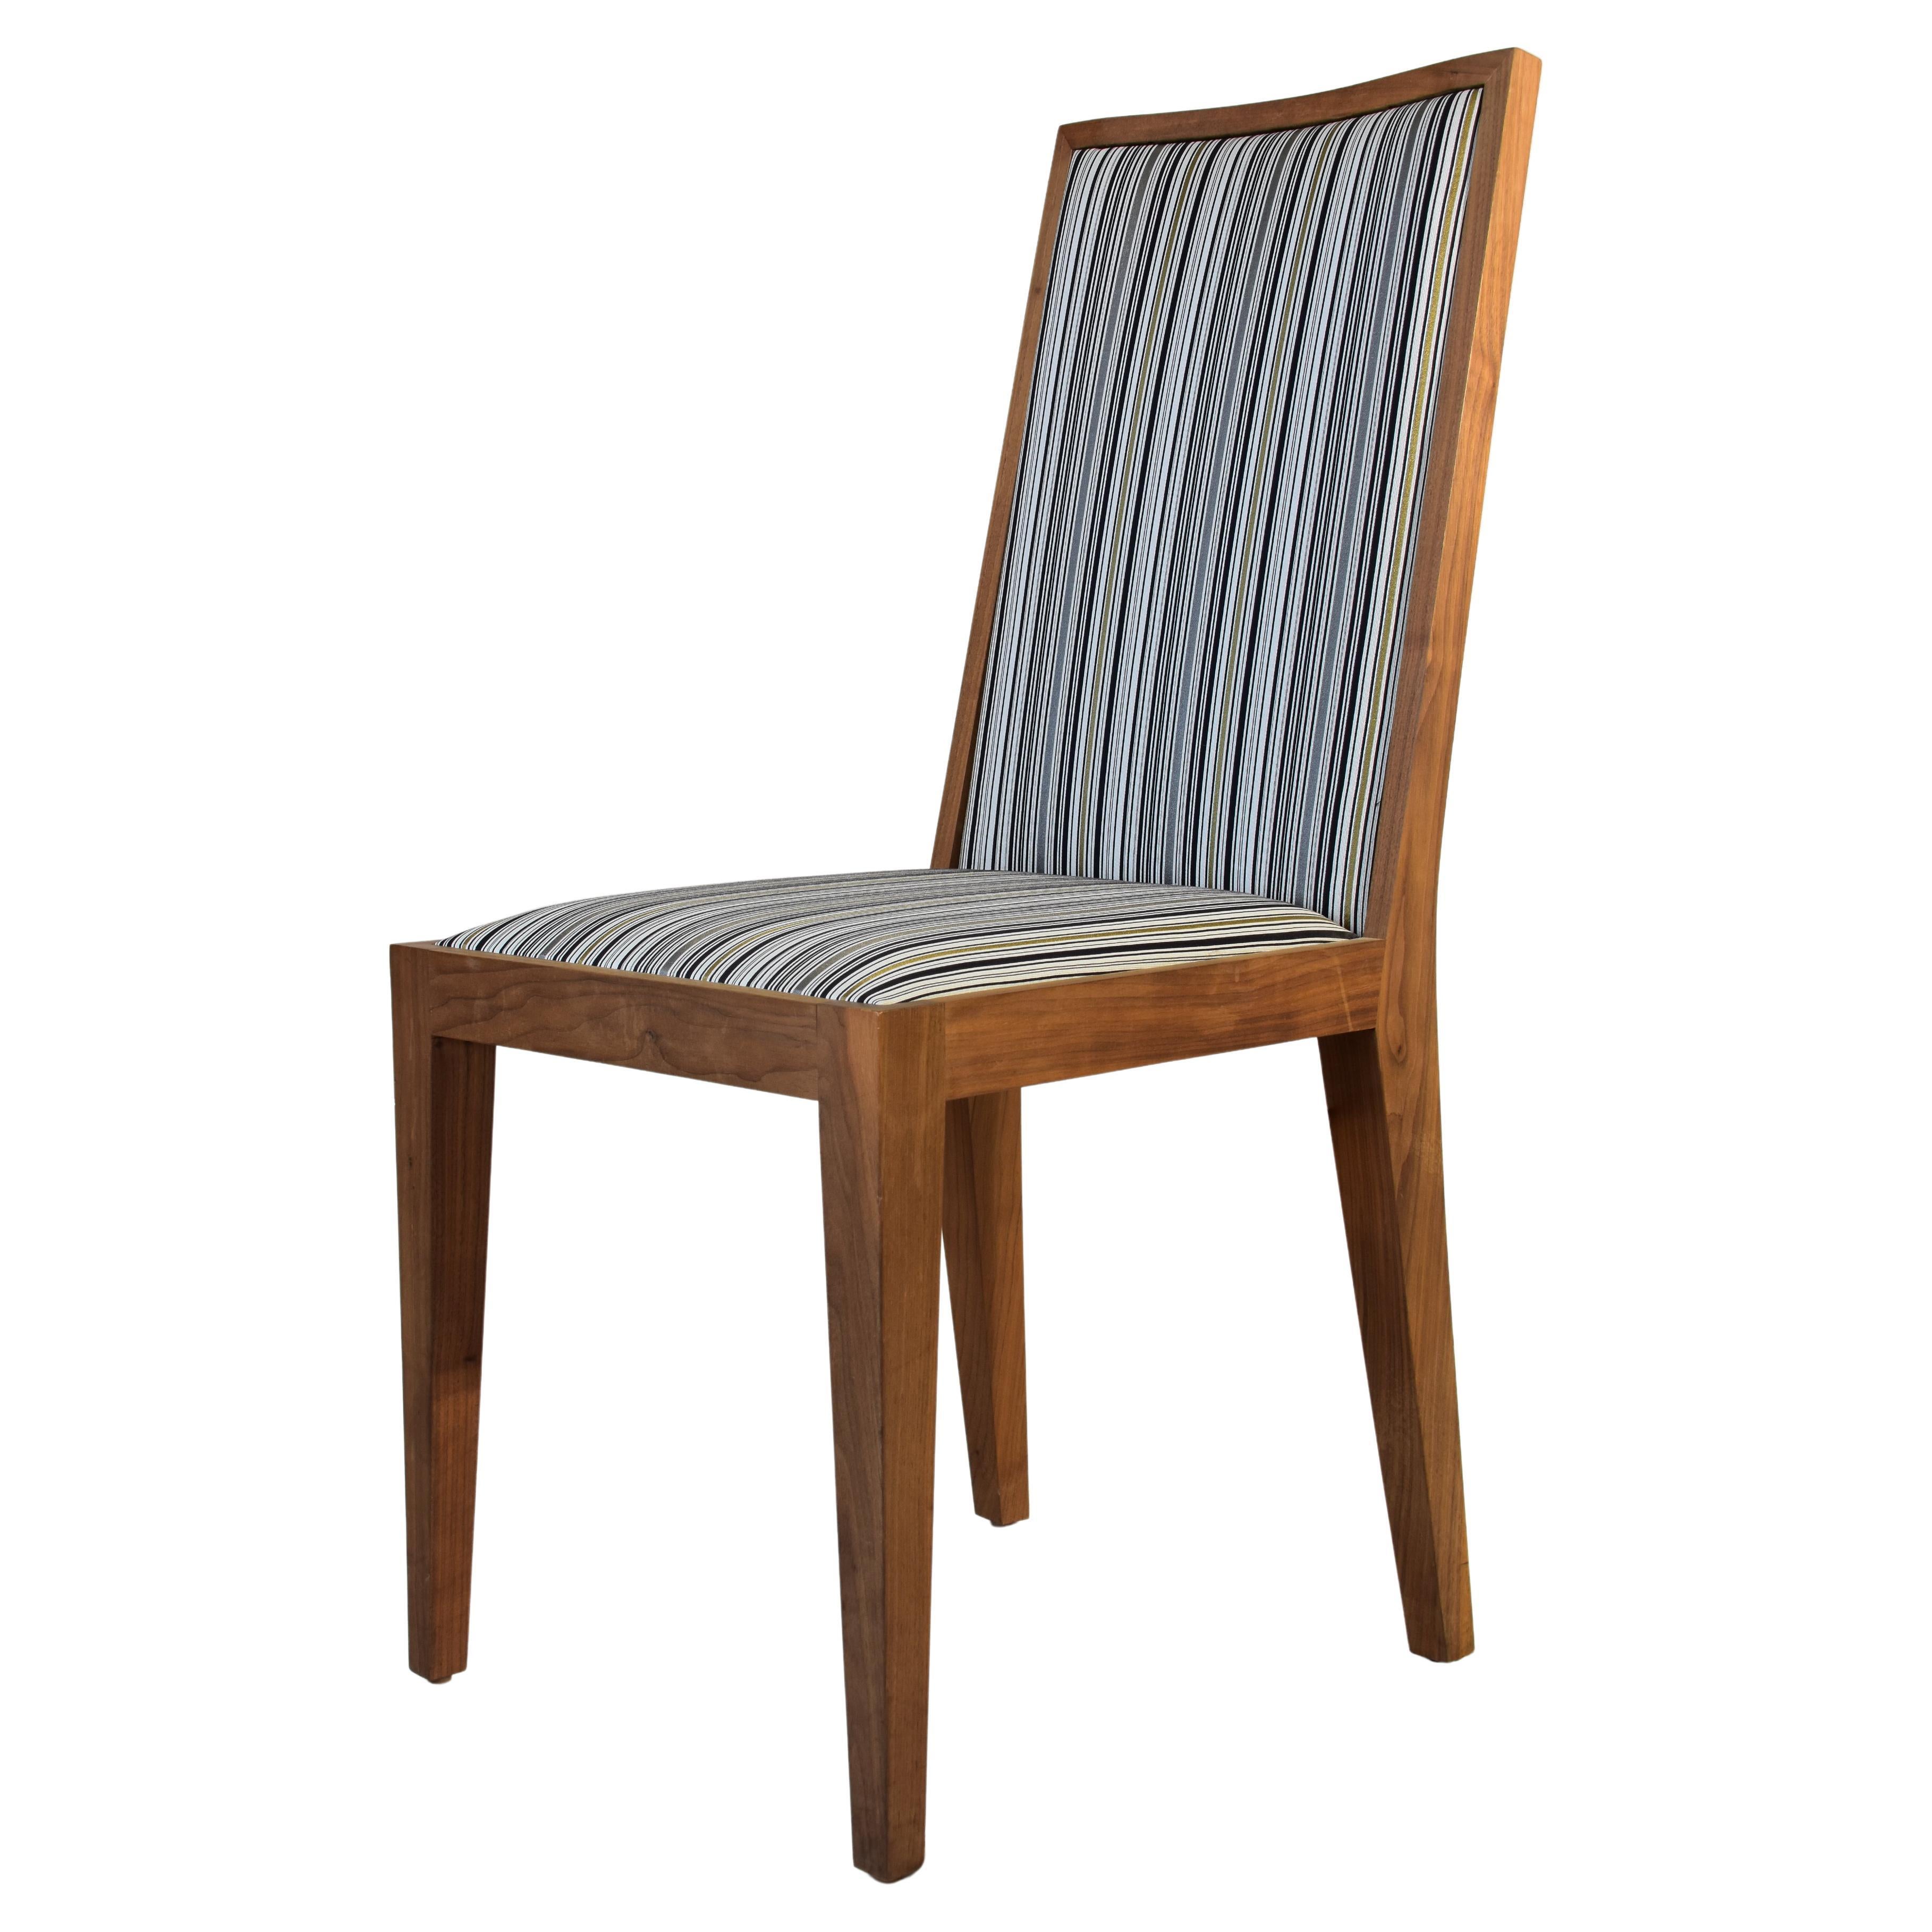 Le Jeune Upholstery Antonella Walnut  Dining Chair Showroom Model For Sale